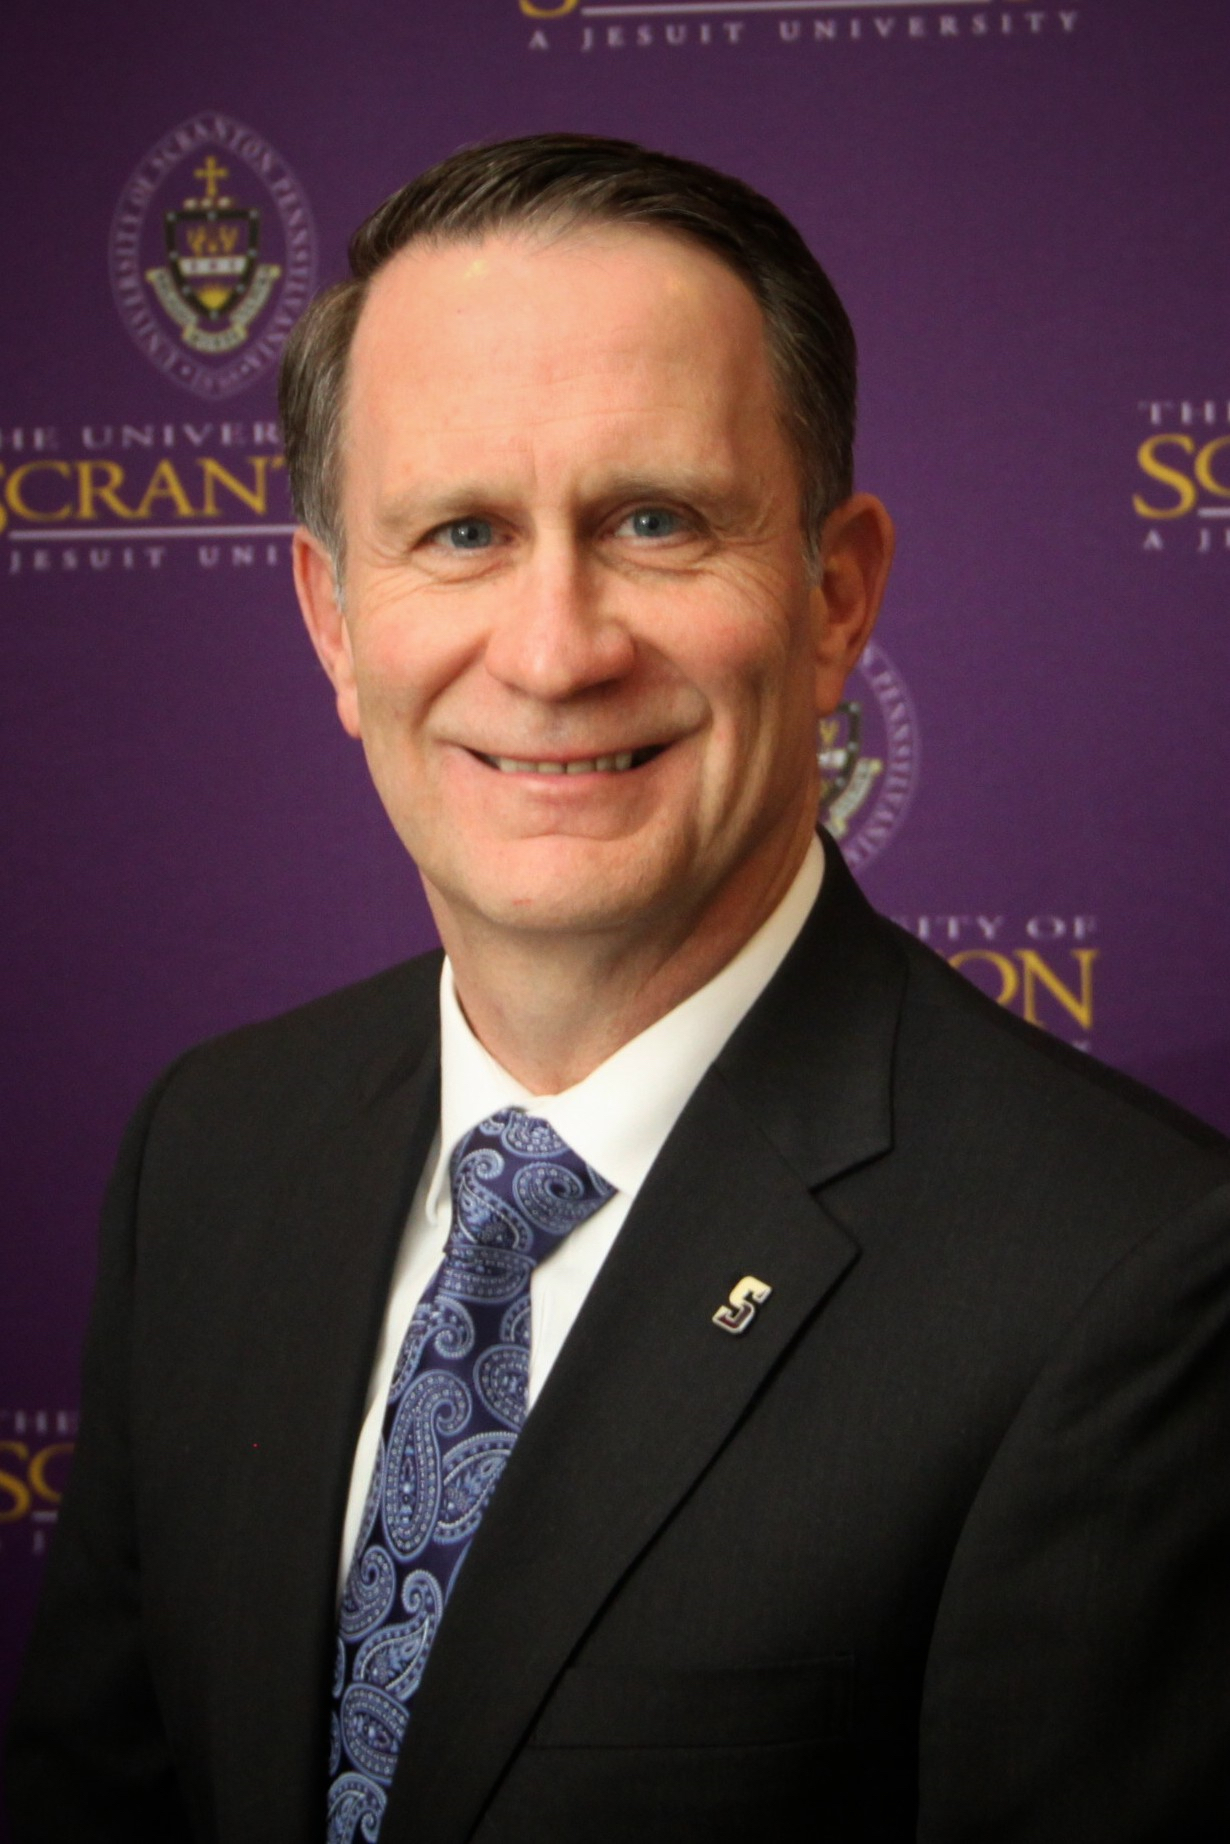 Harry Dammer, Ph.D., has been named associate dean for the College of Arts and Sciences at The University of Scranton.